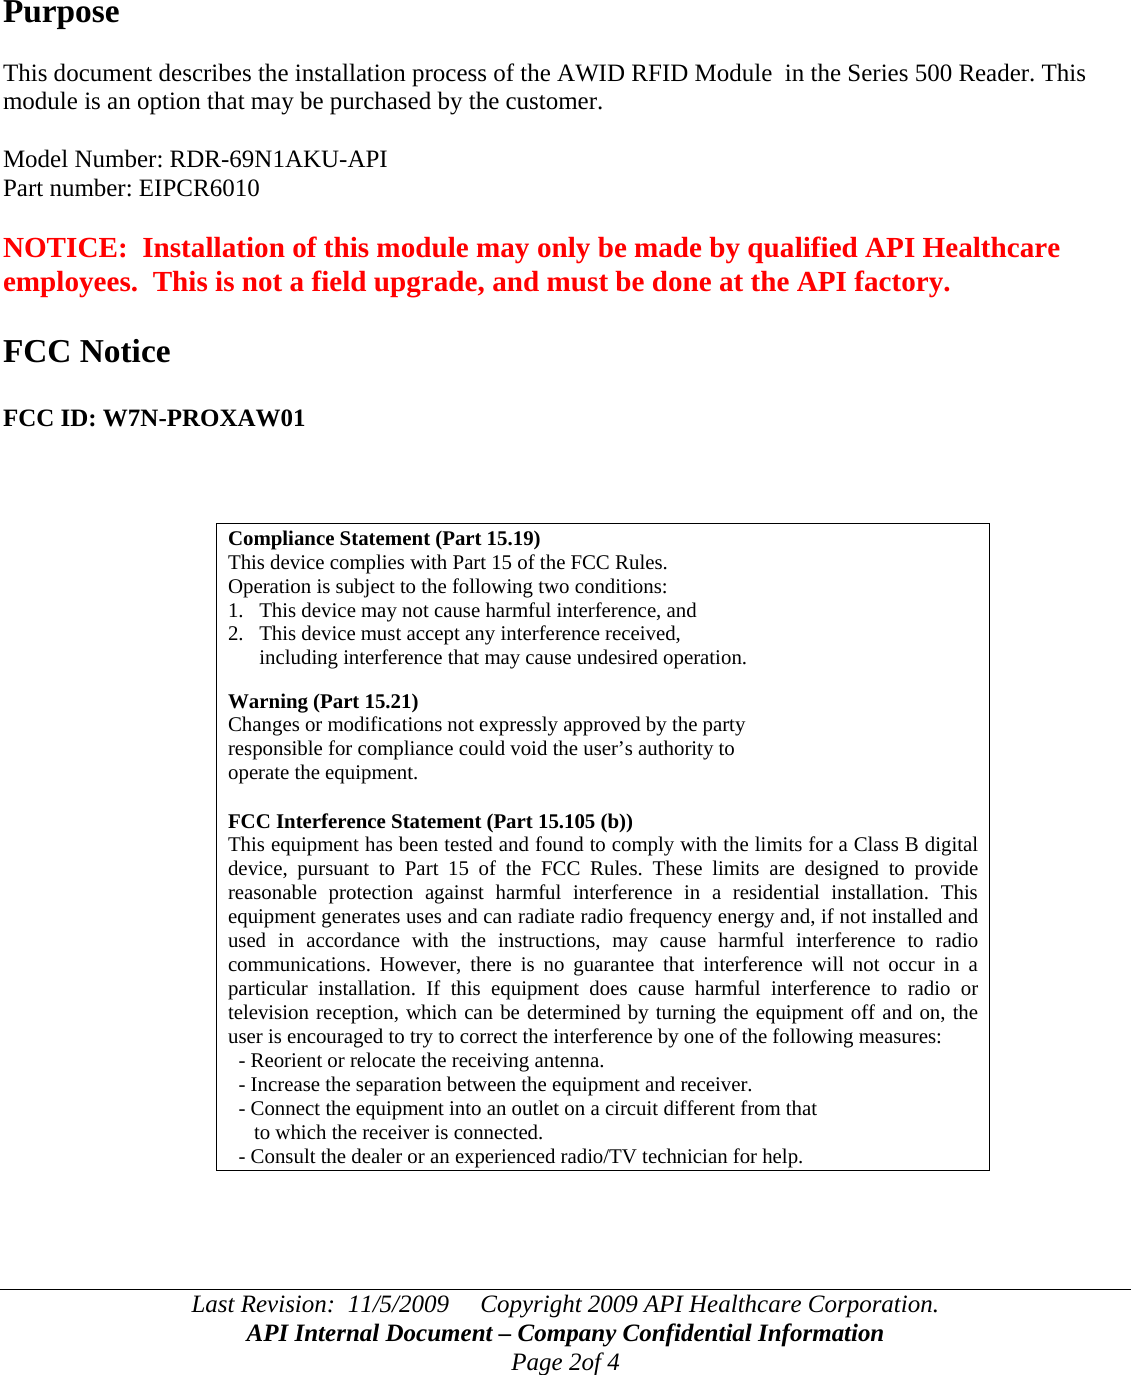 Last Revision:  11/5/2009     Copyright 2009 API Healthcare Corporation. API Internal Document – Company Confidential Information Page 2of 4     Purpose  This document describes the installation process of the AWID RFID Module  in the Series 500 Reader. This module is an option that may be purchased by the customer.  Model Number: RDR-69N1AKU-API Part number: EIPCR6010  NOTICE:  Installation of this module may only be made by qualified API Healthcare employees.  This is not a field upgrade, and must be done at the API factory.  FCC Notice  FCC ID: W7N-PROXAW01    Compliance Statement (Part 15.19) This device complies with Part 15 of the FCC Rules.  Operation is subject to the following two conditions:  1.   This device may not cause harmful interference, and  2.   This device must accept any interference received,        including interference that may cause undesired operation.  Warning (Part 15.21) Changes or modifications not expressly approved by the party  responsible for compliance could void the user’s authority to  operate the equipment.  FCC Interference Statement (Part 15.105 (b)) This equipment has been tested and found to comply with the limits for a Class B digital device, pursuant to Part 15 of the FCC Rules. These limits are designed to provide reasonable protection against harmful interference in a residential installation. This equipment generates uses and can radiate radio frequency energy and, if not installed and used in accordance with the instructions, may cause harmful interference to radio communications. However, there is no guarantee that interference will not occur in a particular installation. If this equipment does cause harmful interference to radio or television reception, which can be determined by turning the equipment off and on, the user is encouraged to try to correct the interference by one of the following measures:   - Reorient or relocate the receiving antenna.   - Increase the separation between the equipment and receiver.   - Connect the equipment into an outlet on a circuit different from that        to which the receiver is connected.   - Consult the dealer or an experienced radio/TV technician for help.    